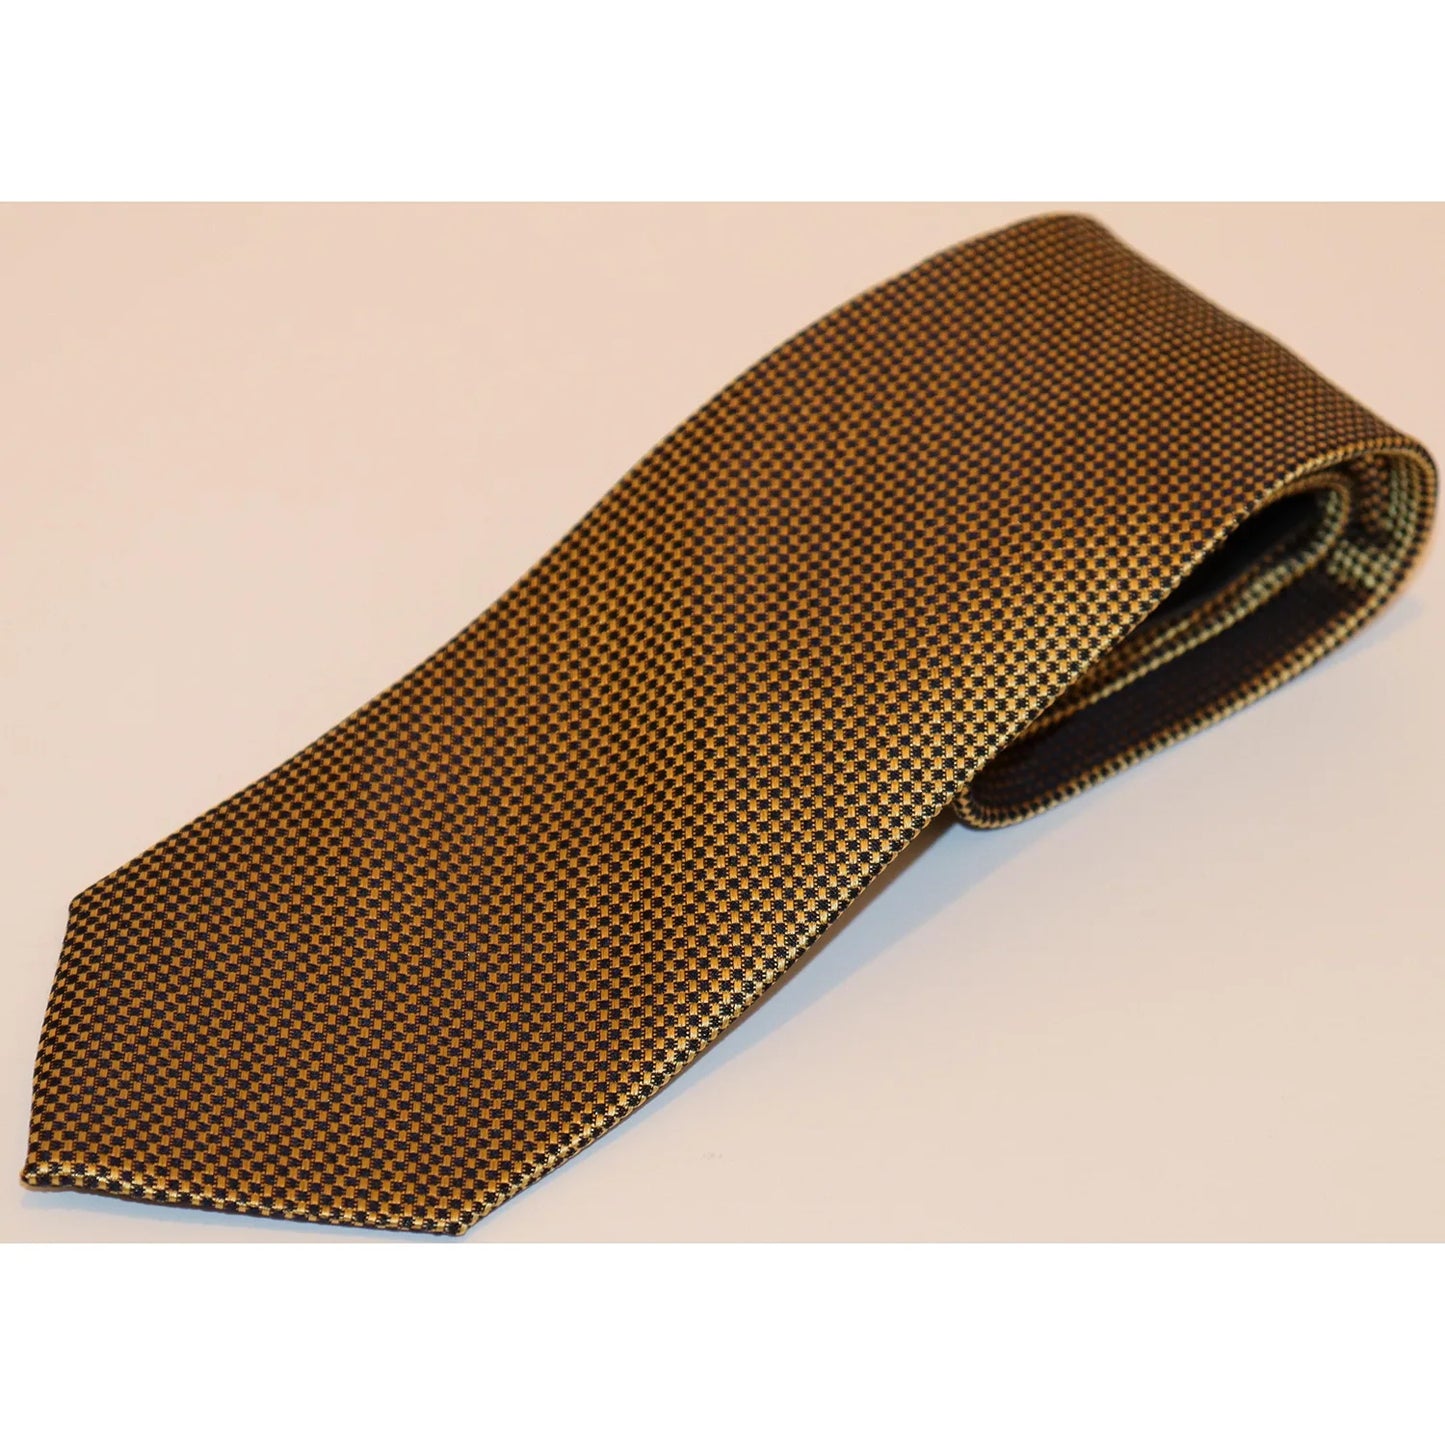 The Shirt Shop Tie - Gold with Black Micro Check